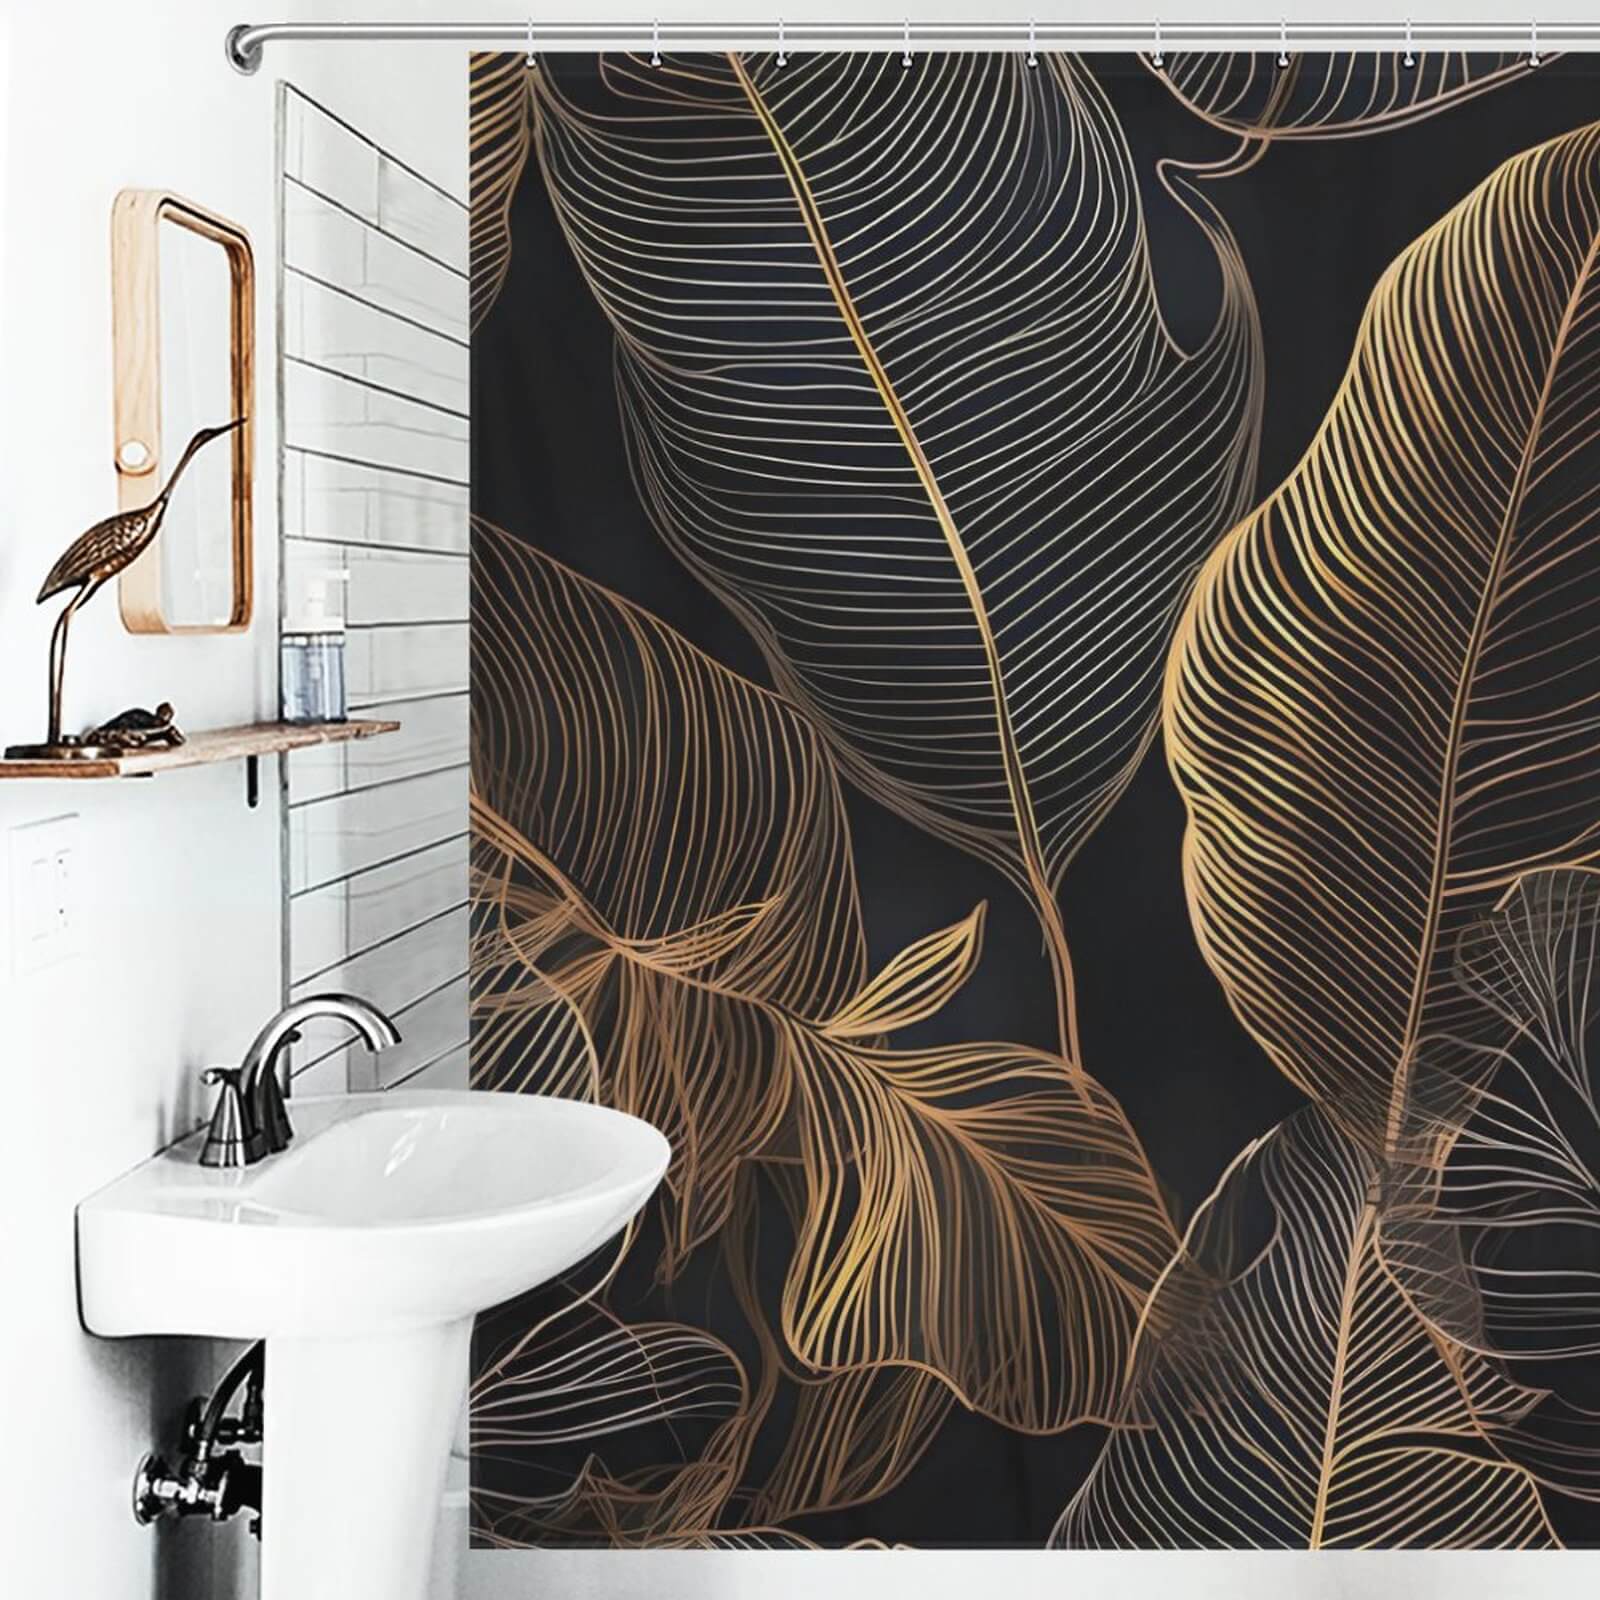 Transform your bathroom with a luxurious touch of elegance by adding the Golden Tropical Leaves Jungle Shower Curtain-Cottoncat from Cotton Cat. Crafted with exquisite attention to detail, this waterproof curtain not only enhances the overall aesthetic of your bathroom